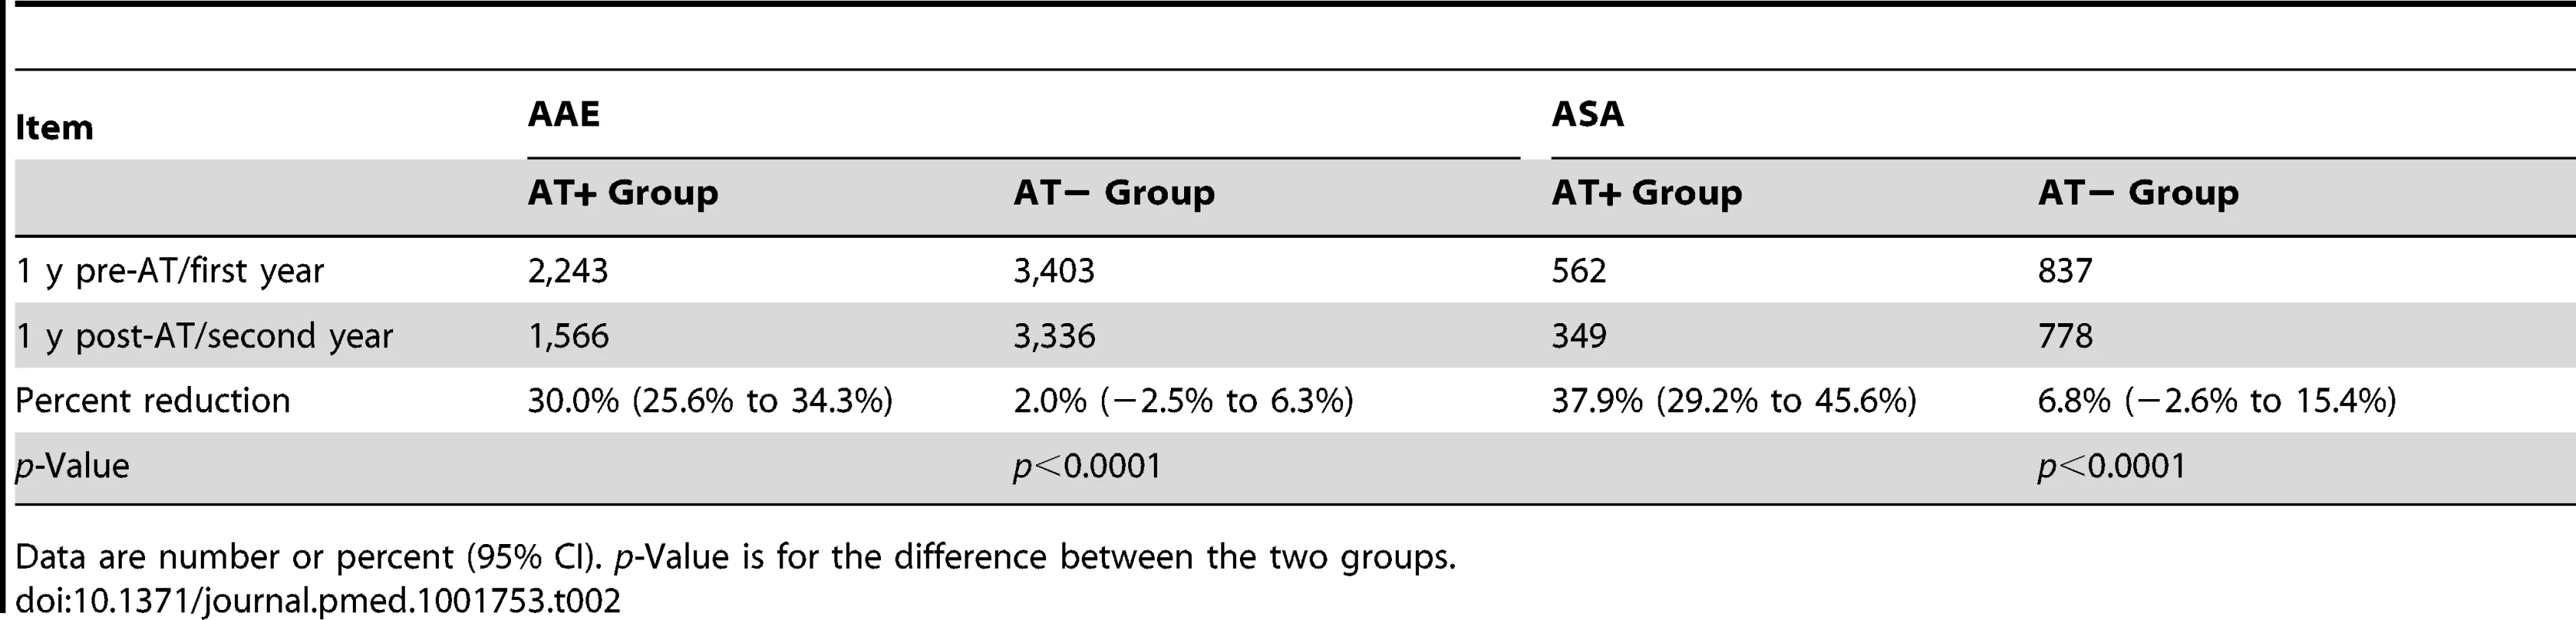 Annual incidence of acute asthma exacerbation and acute status asthmaticus: comparing adenotonsillectomy to no adenotonsillectomy.